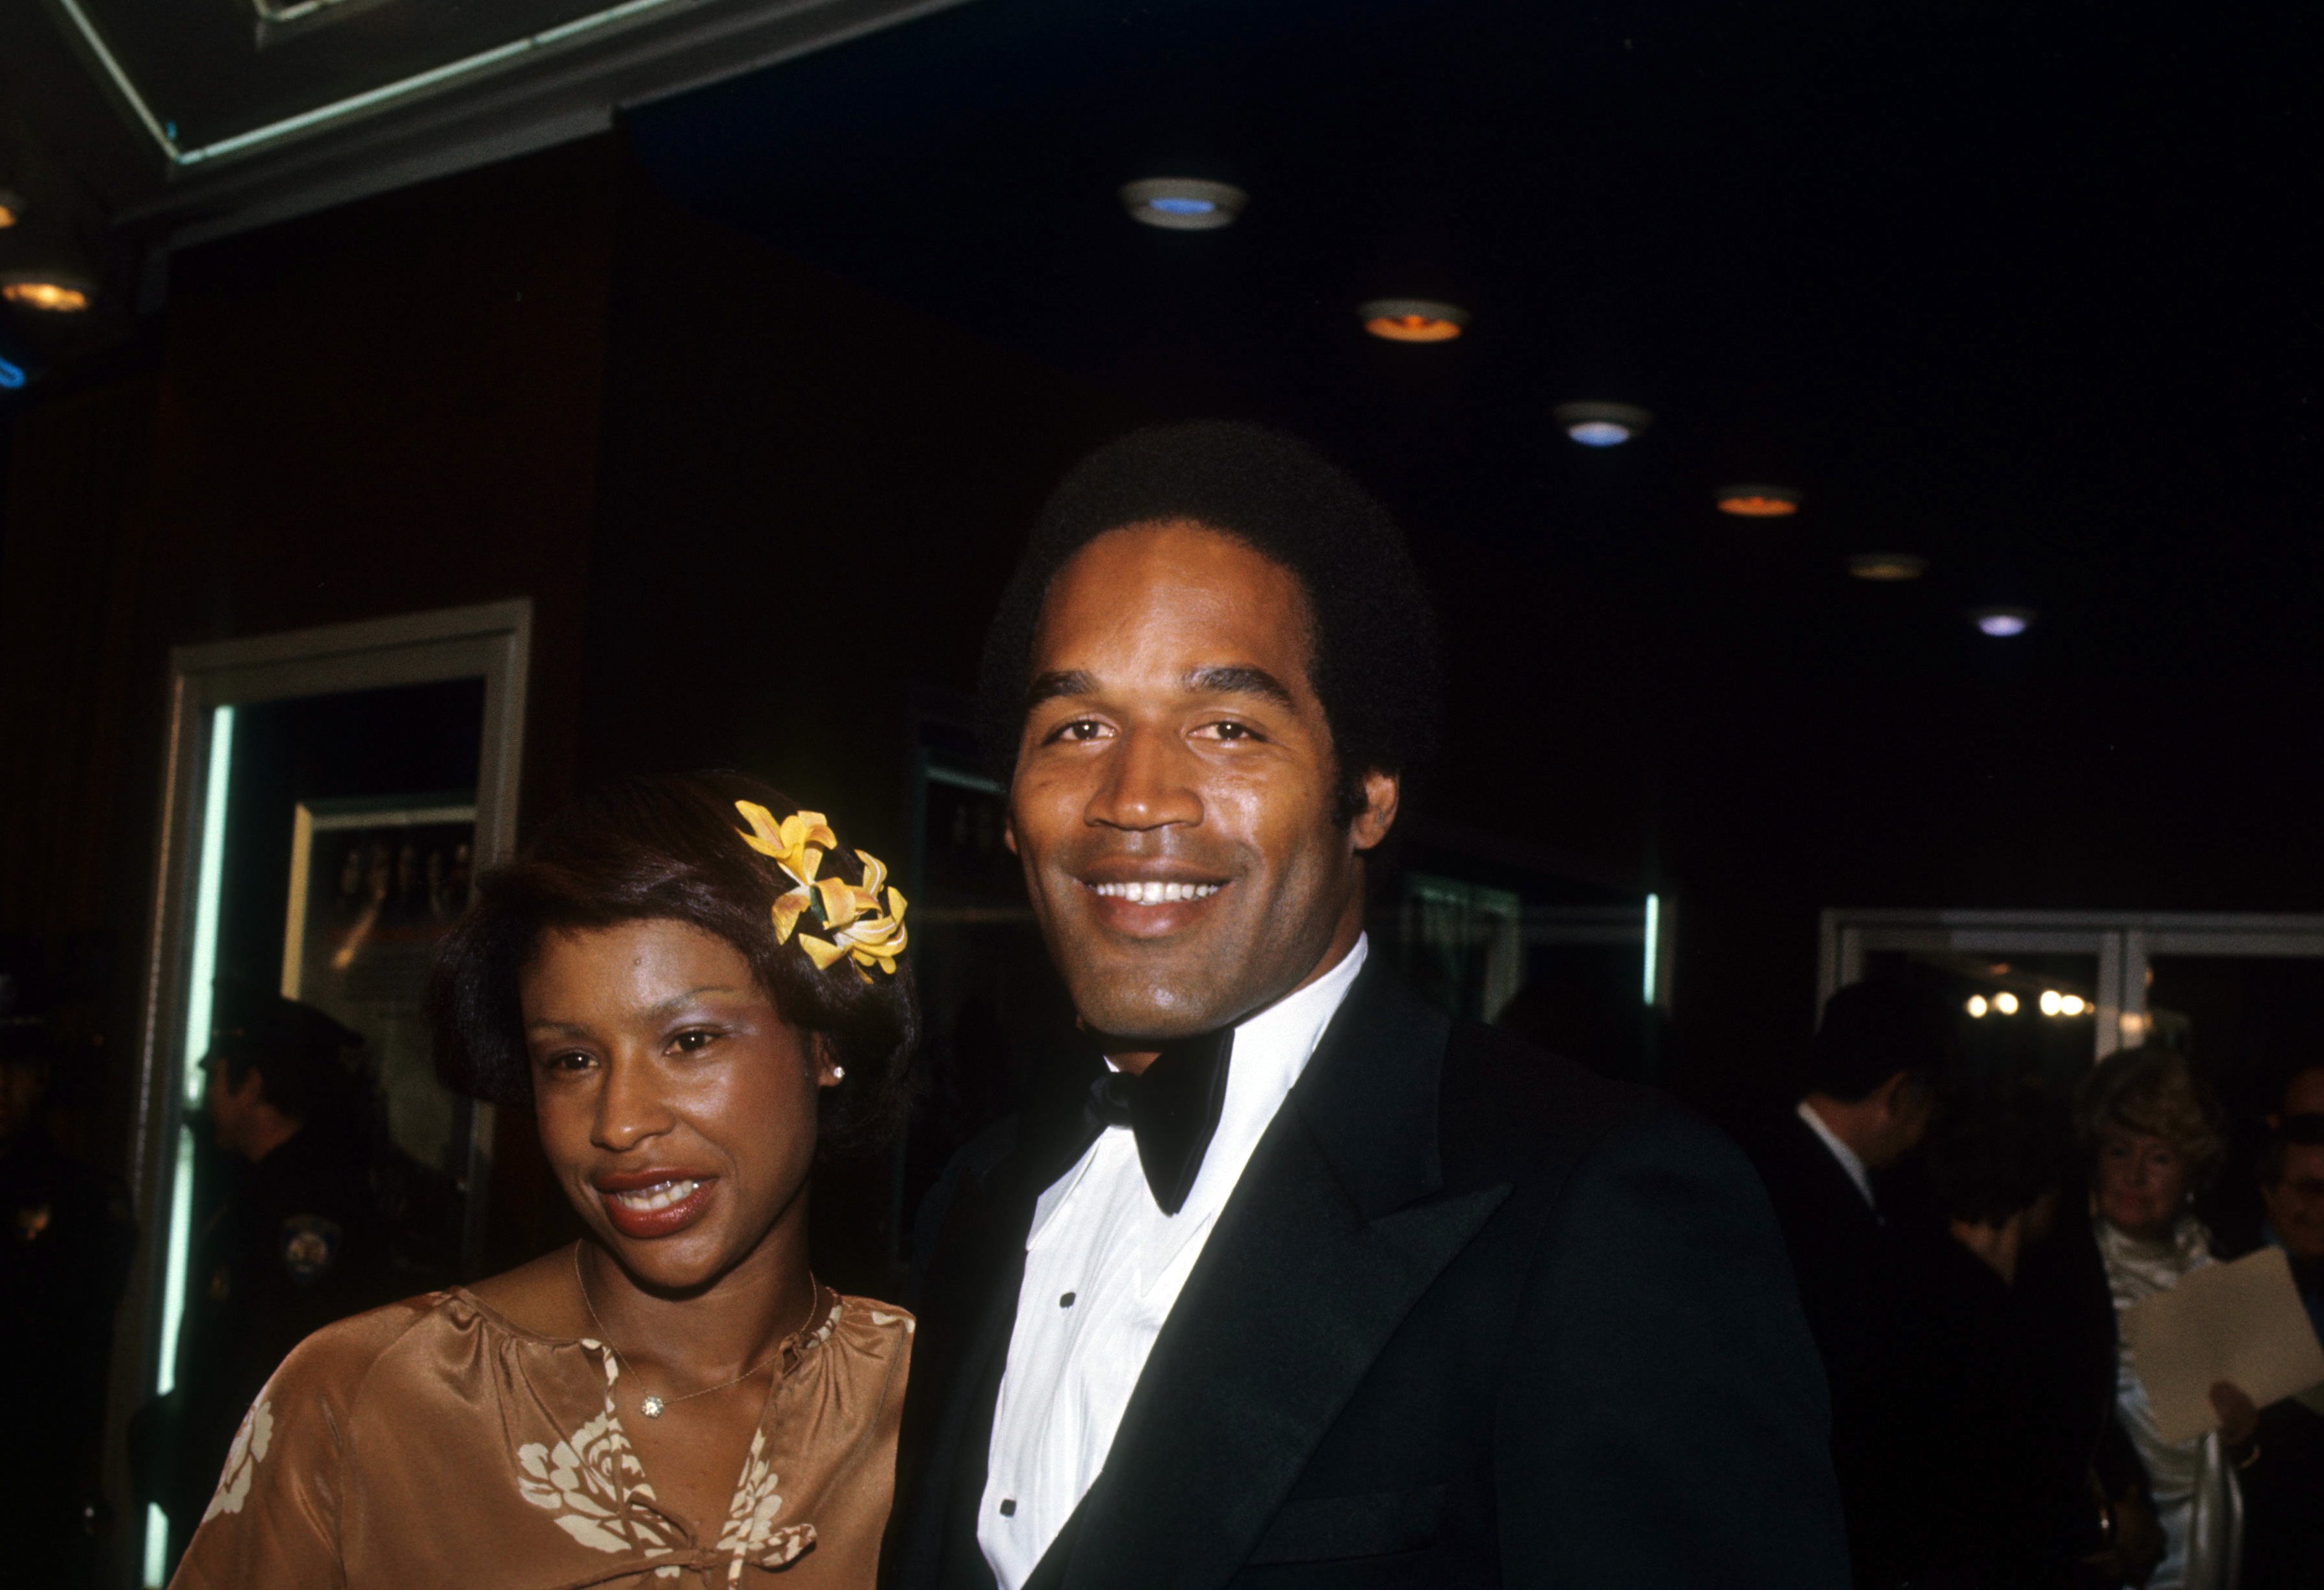 Marguerite Whitley and O.J. Simpson pose for a portrait at a movie premiere in 1977, in Los Angeles, California. | Source: Getty Images